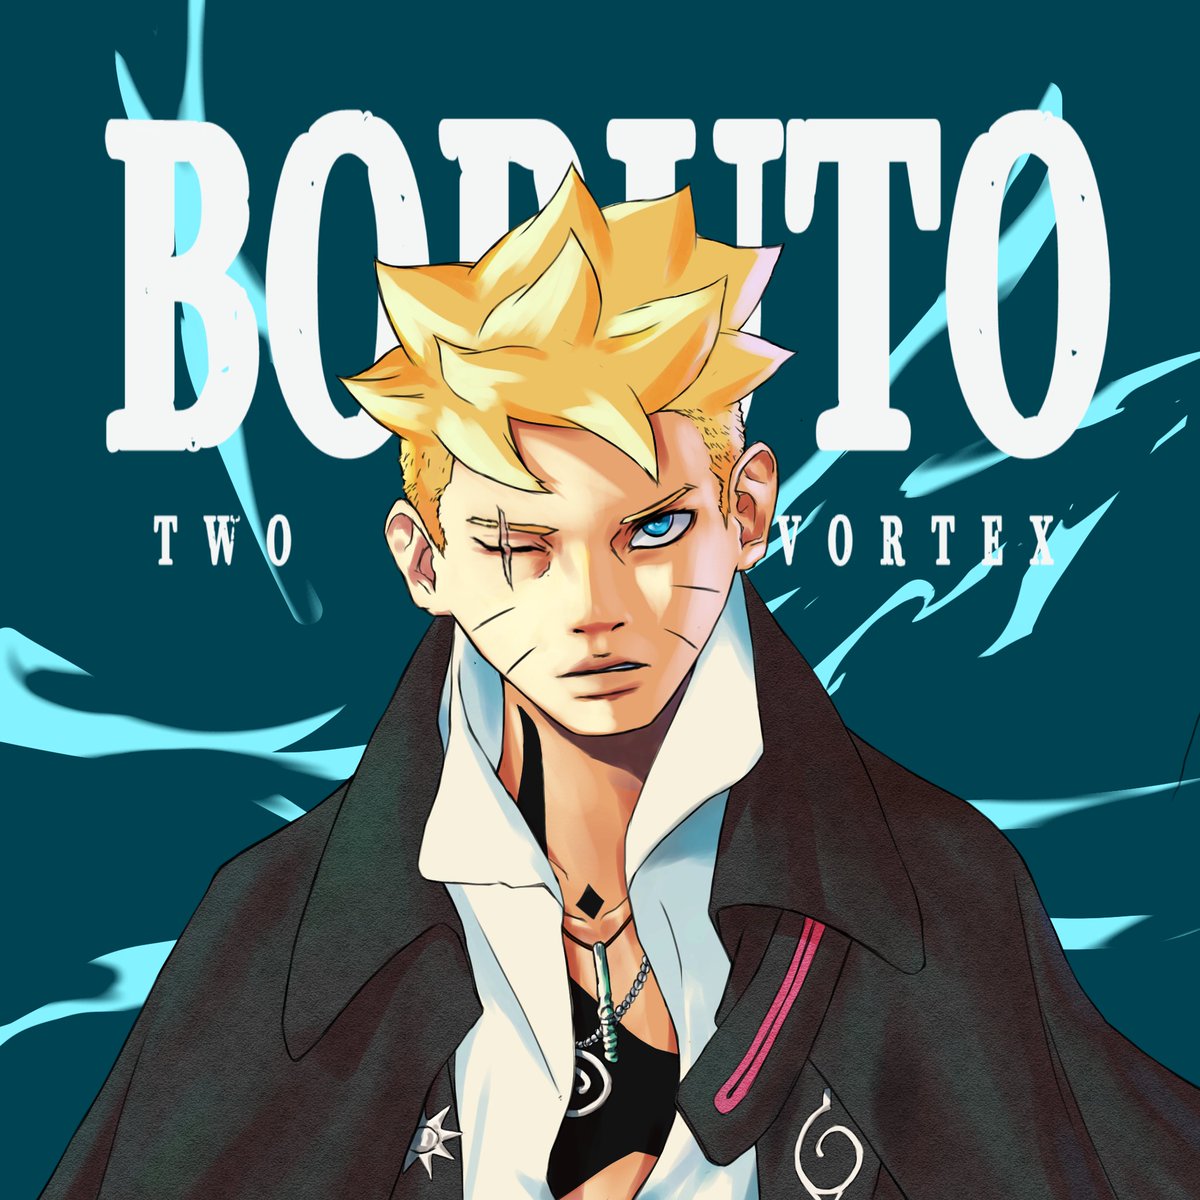 Boruto:two blue vortex

Cover art

I enjoy this lighting and I've done it a few times but I never really commit but it really works 

#BORUTO #BorutoTwoBlueVortex #mangaart #digitalartwork